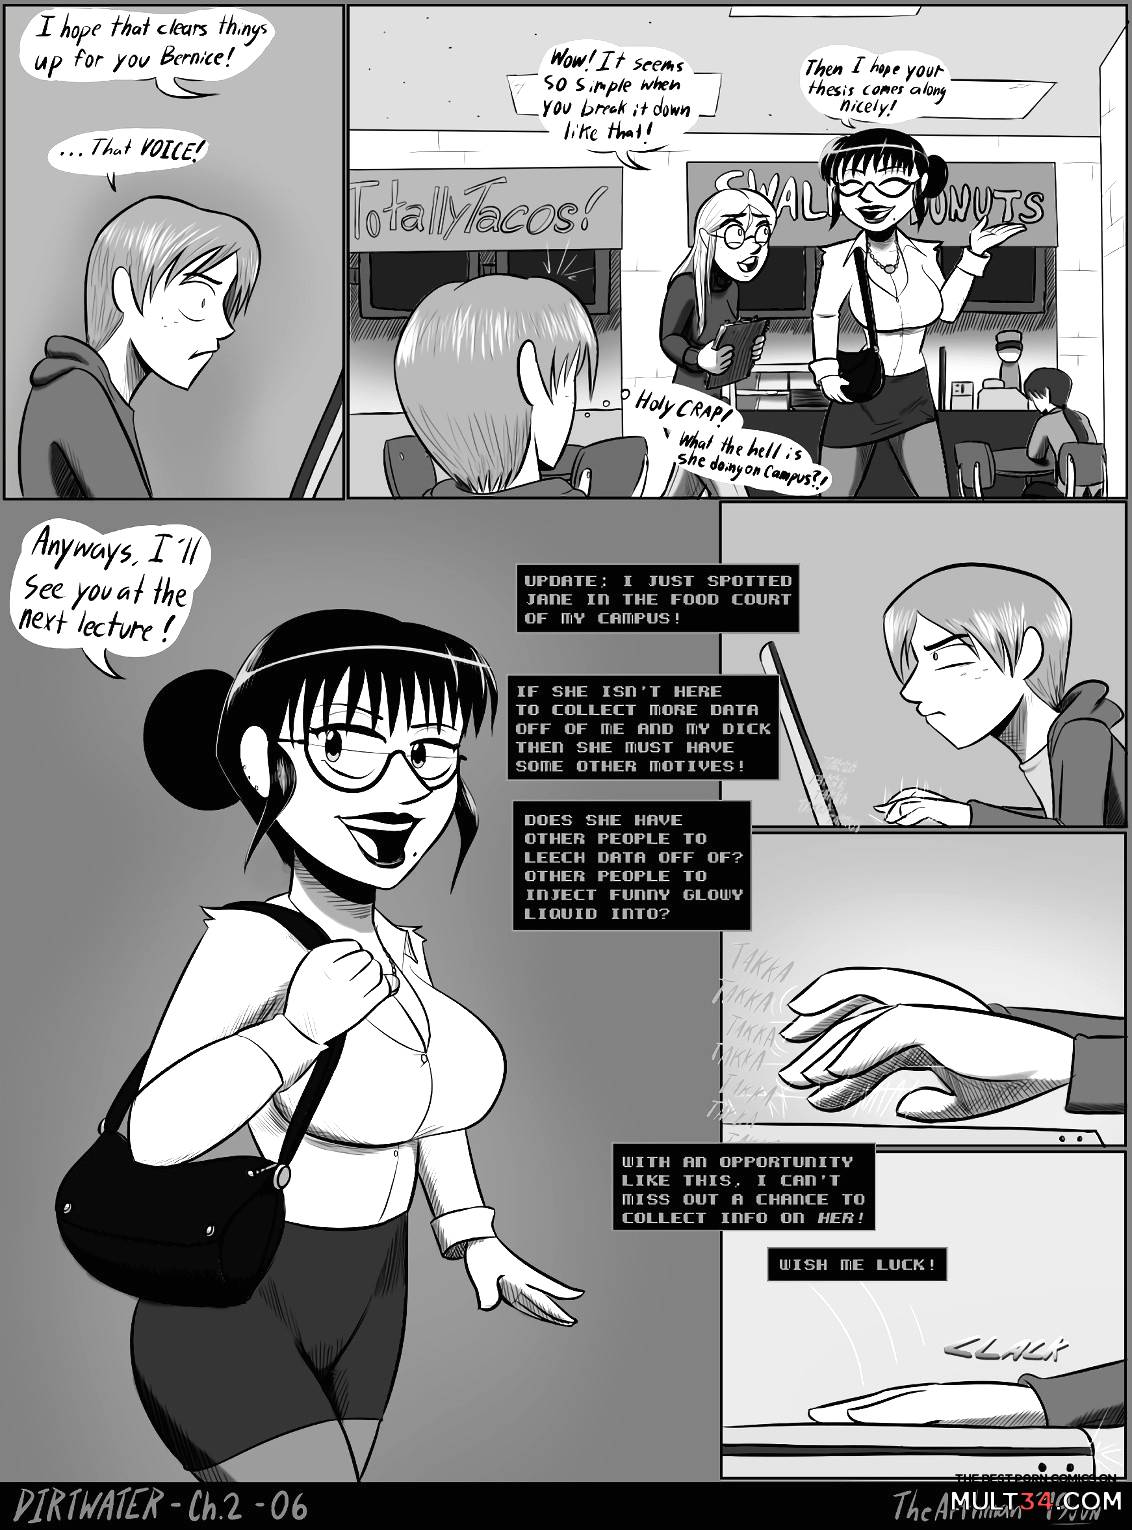 Dirtwater - Chapter 2 (The Big Deposit) page 7